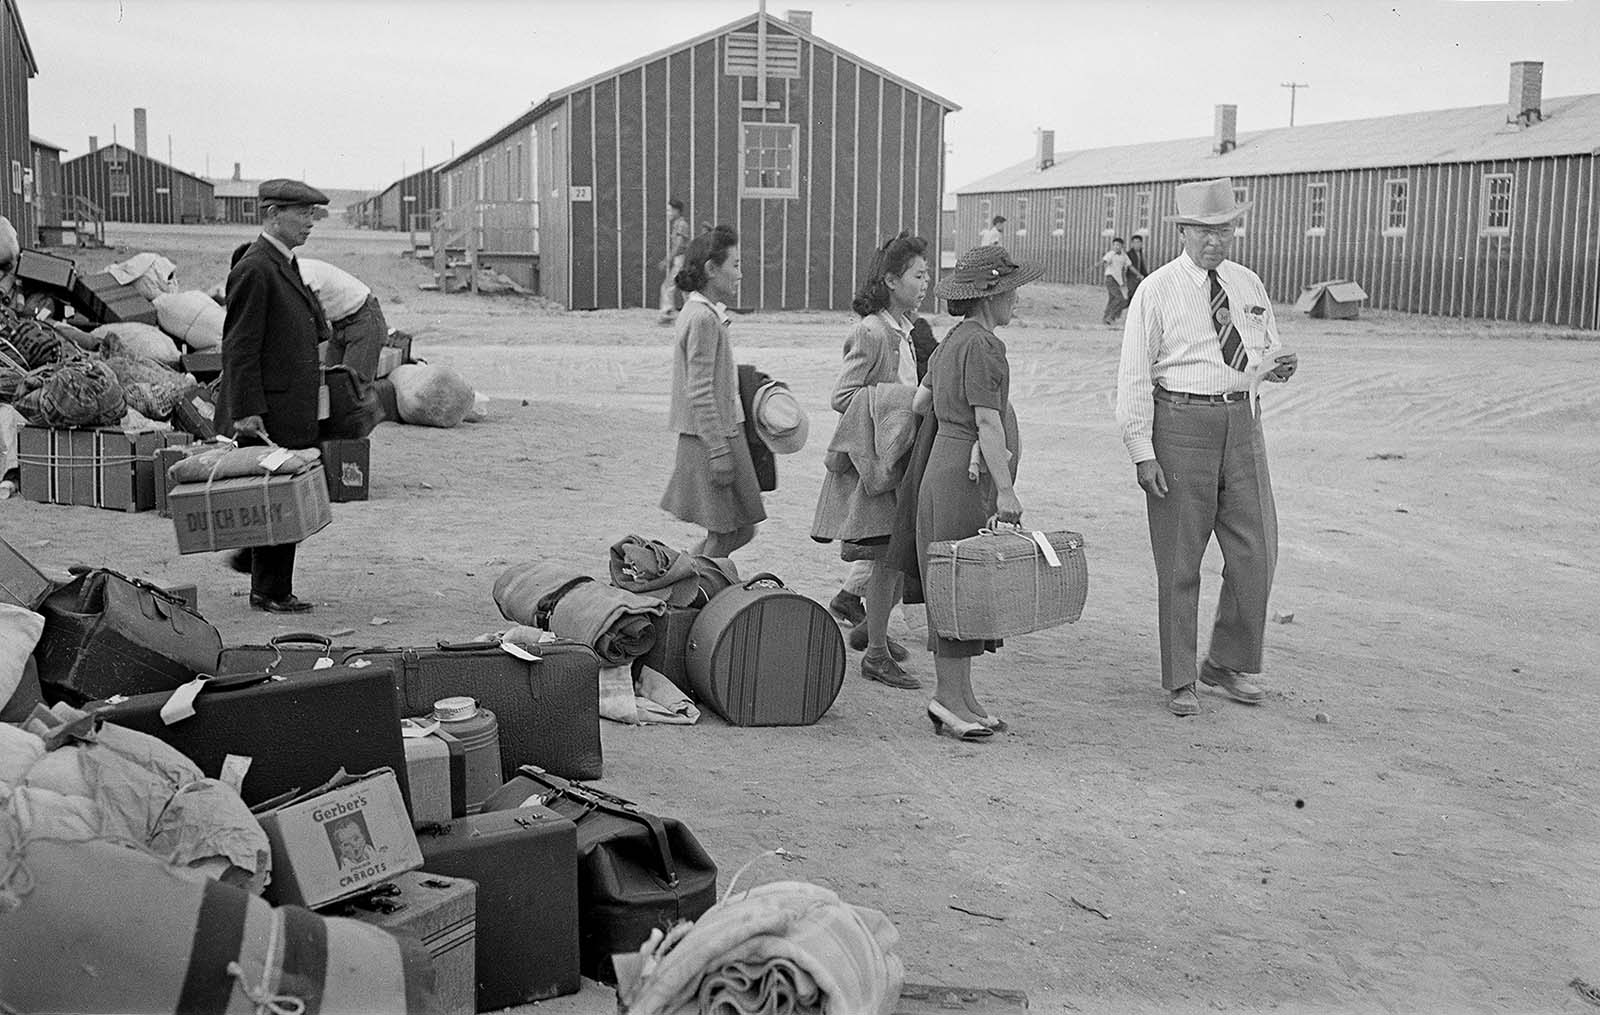 Employee Roy Kohn leads the Fujiwara family to their assigned quarters. MS 89 Jack Richard Photograph Collection, McCracken Research Library. PN.89.111.21236.9